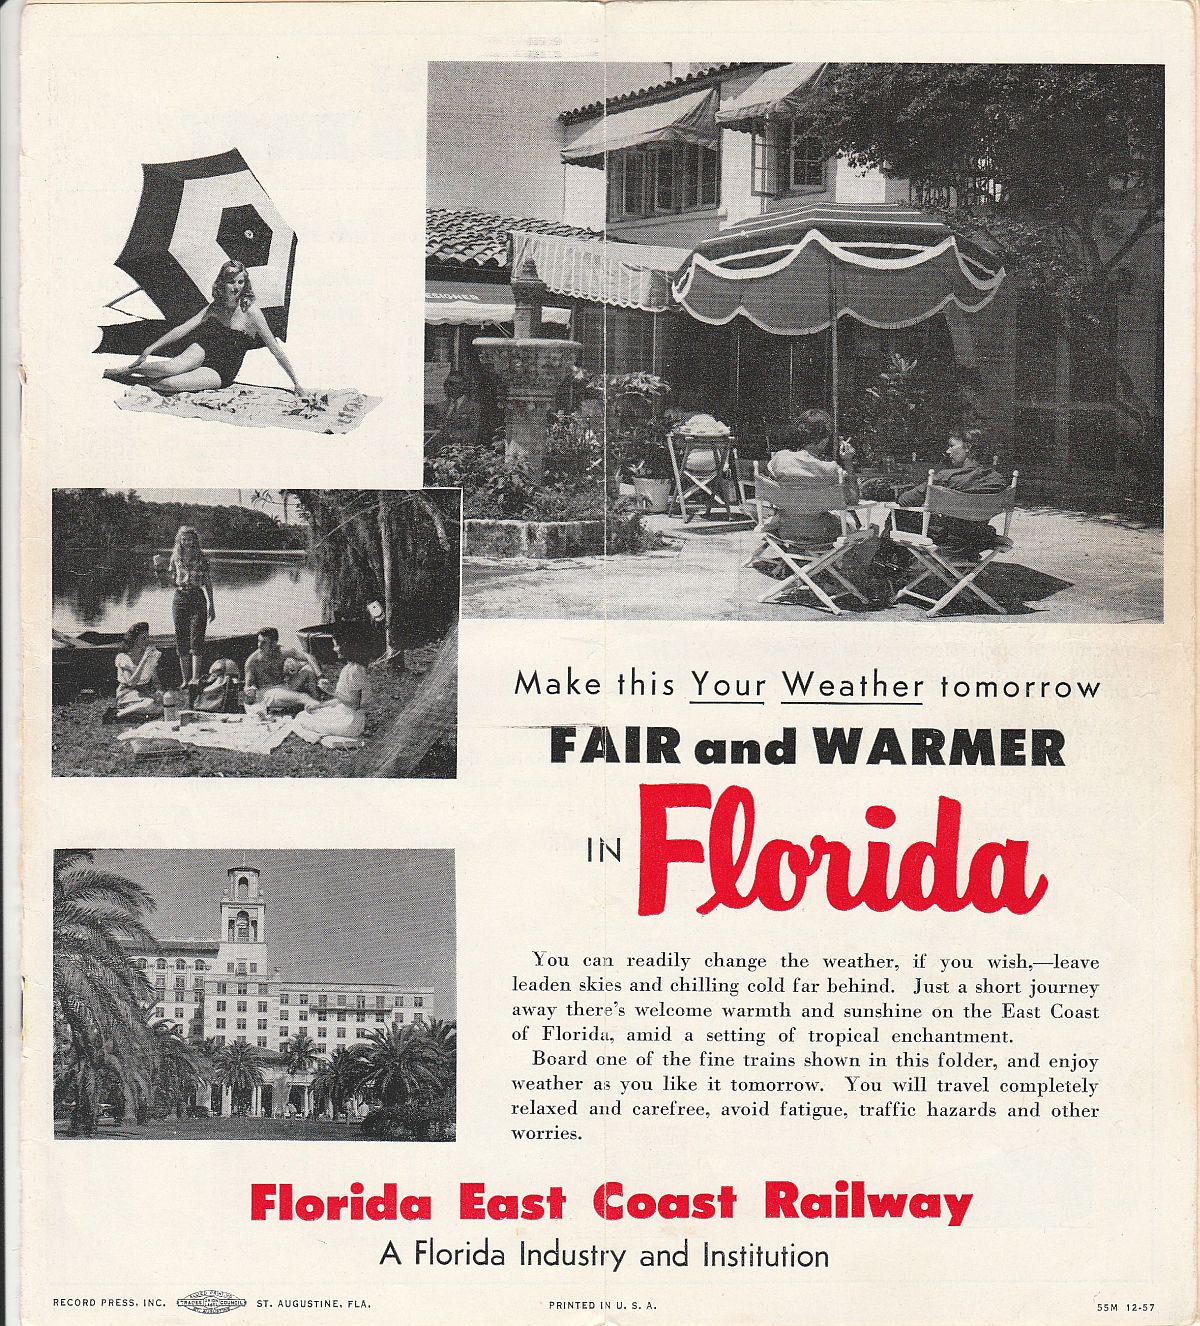 Florida East Coast Railway Dec. 12, 1957 timetable Pg. 1-2: Fair and Warmer in Florida Change the weather by taking the Florida East Coast Railway to the East Coast of Florida